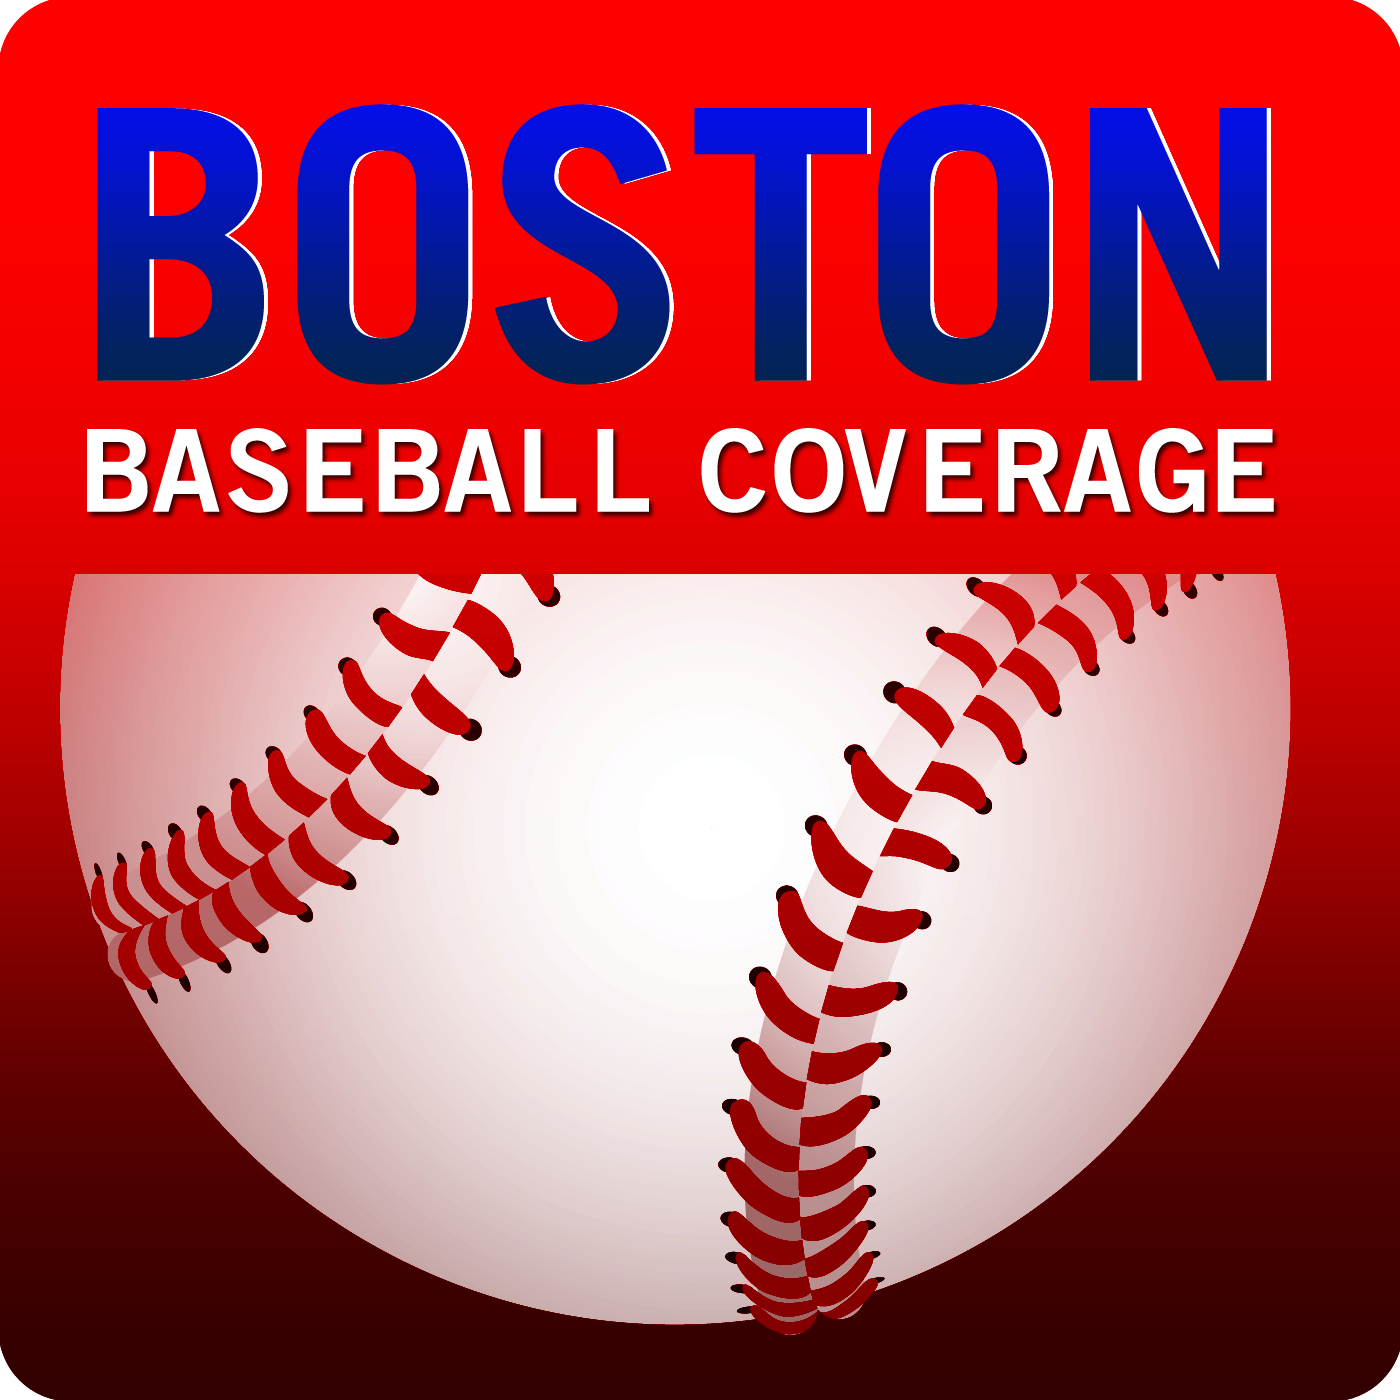 WEEI Red Sox Insider Lou Merloni on overcoming injuries